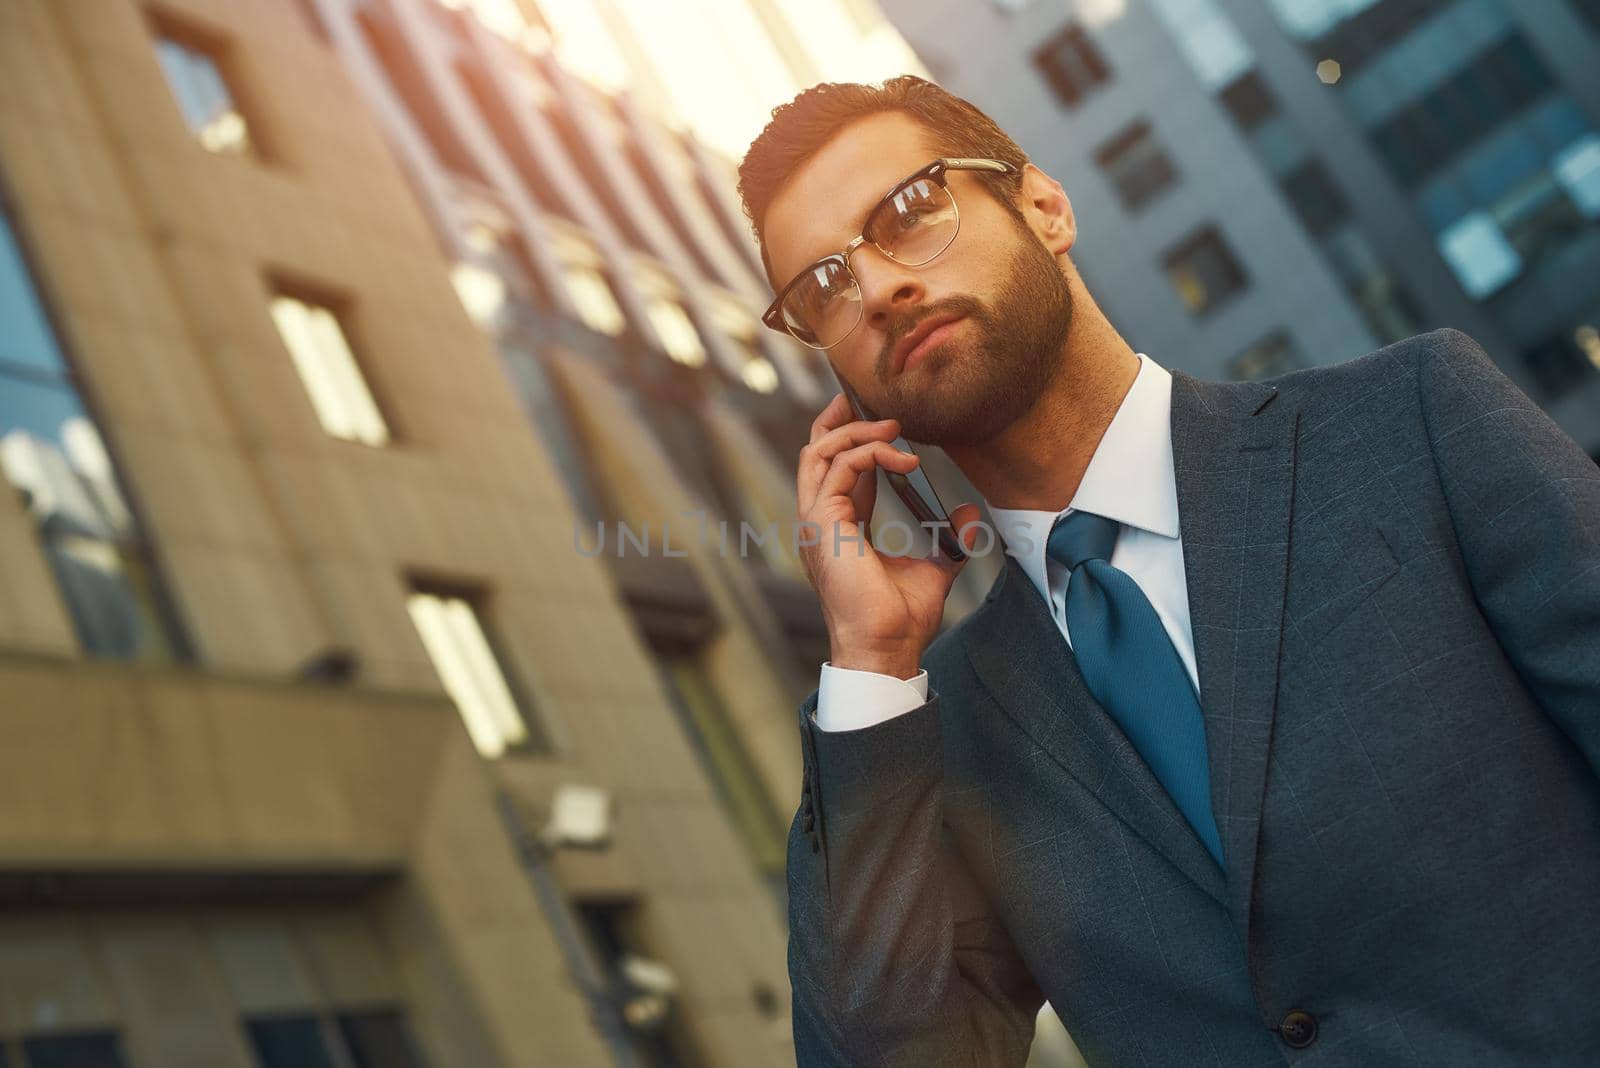 Busy day. Portrait of handsome bearded man in suit talking by phone with client while walking outdoors by friendsstock